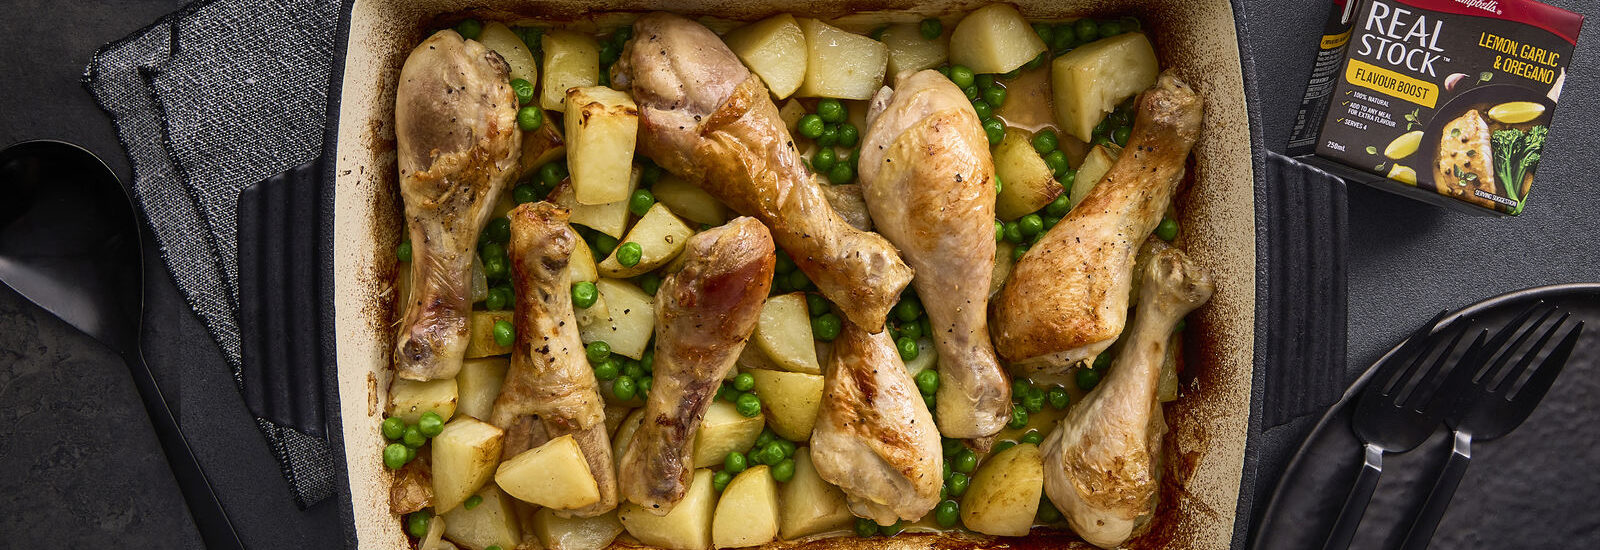 Image of Campbells Flavour Boost Chicken, Pea and Potato dish